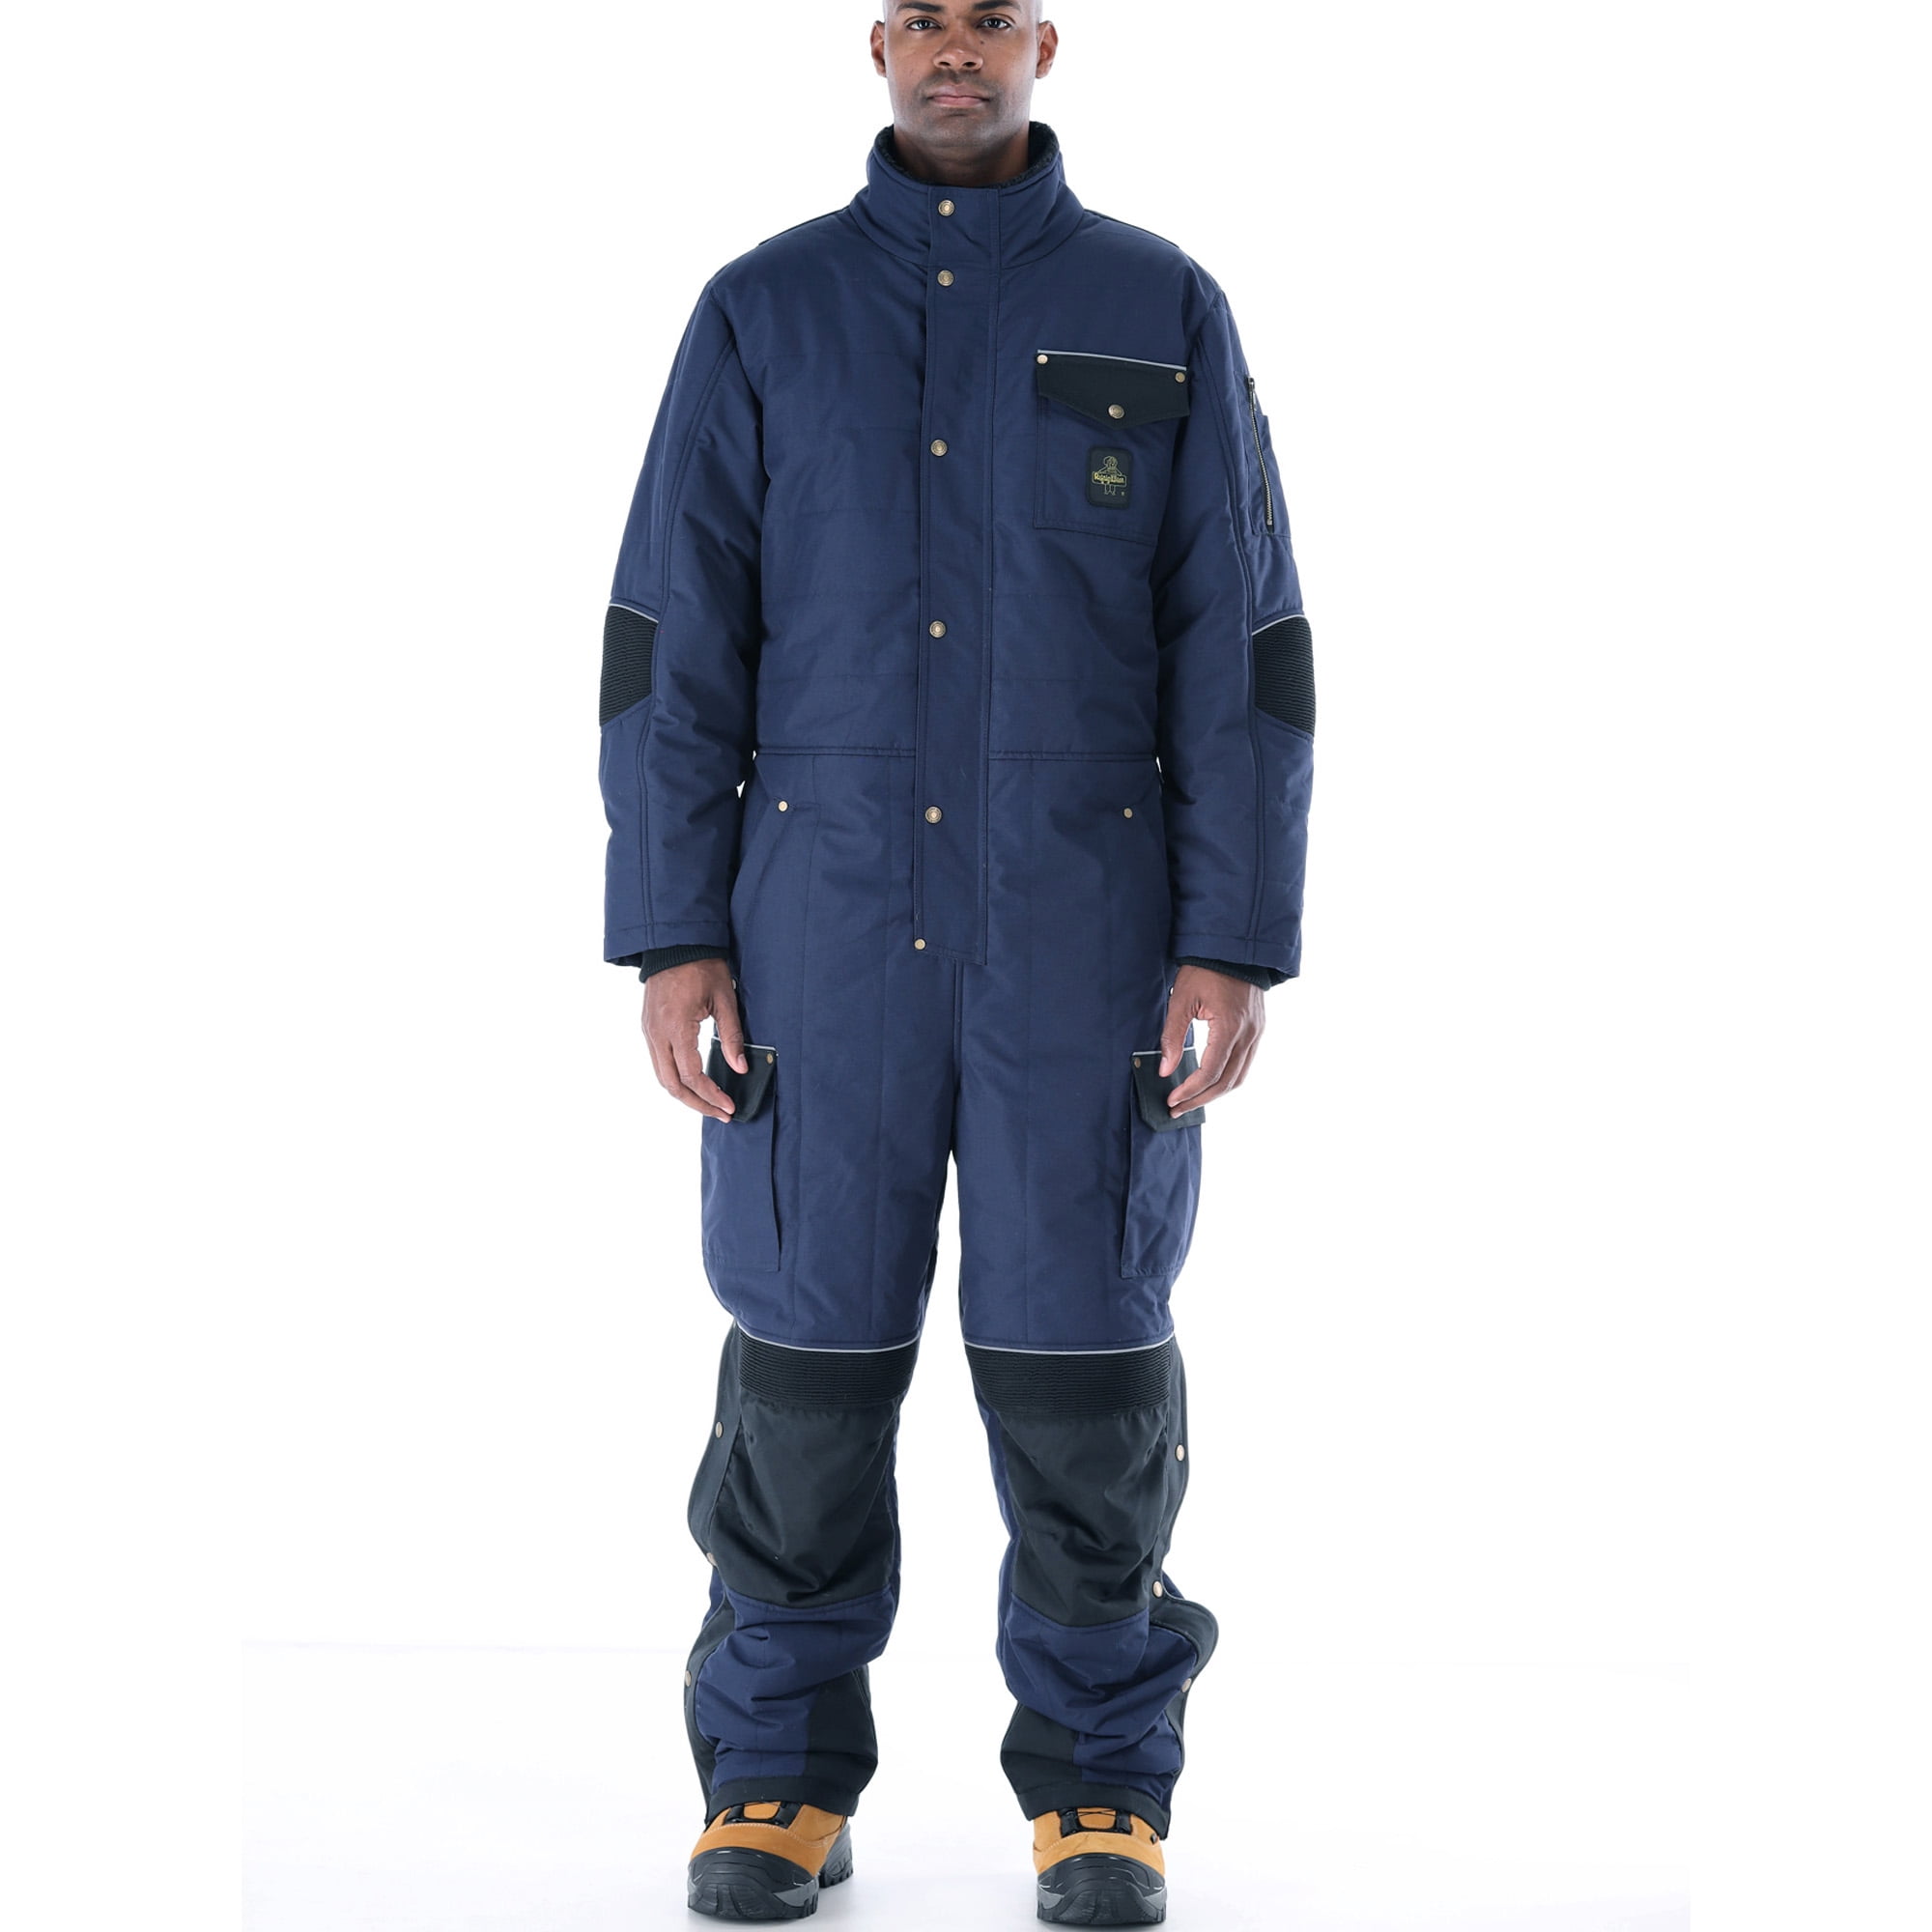 RefrigiWear 54 Gold Insulated Coveralls, Water Repellent and Wind